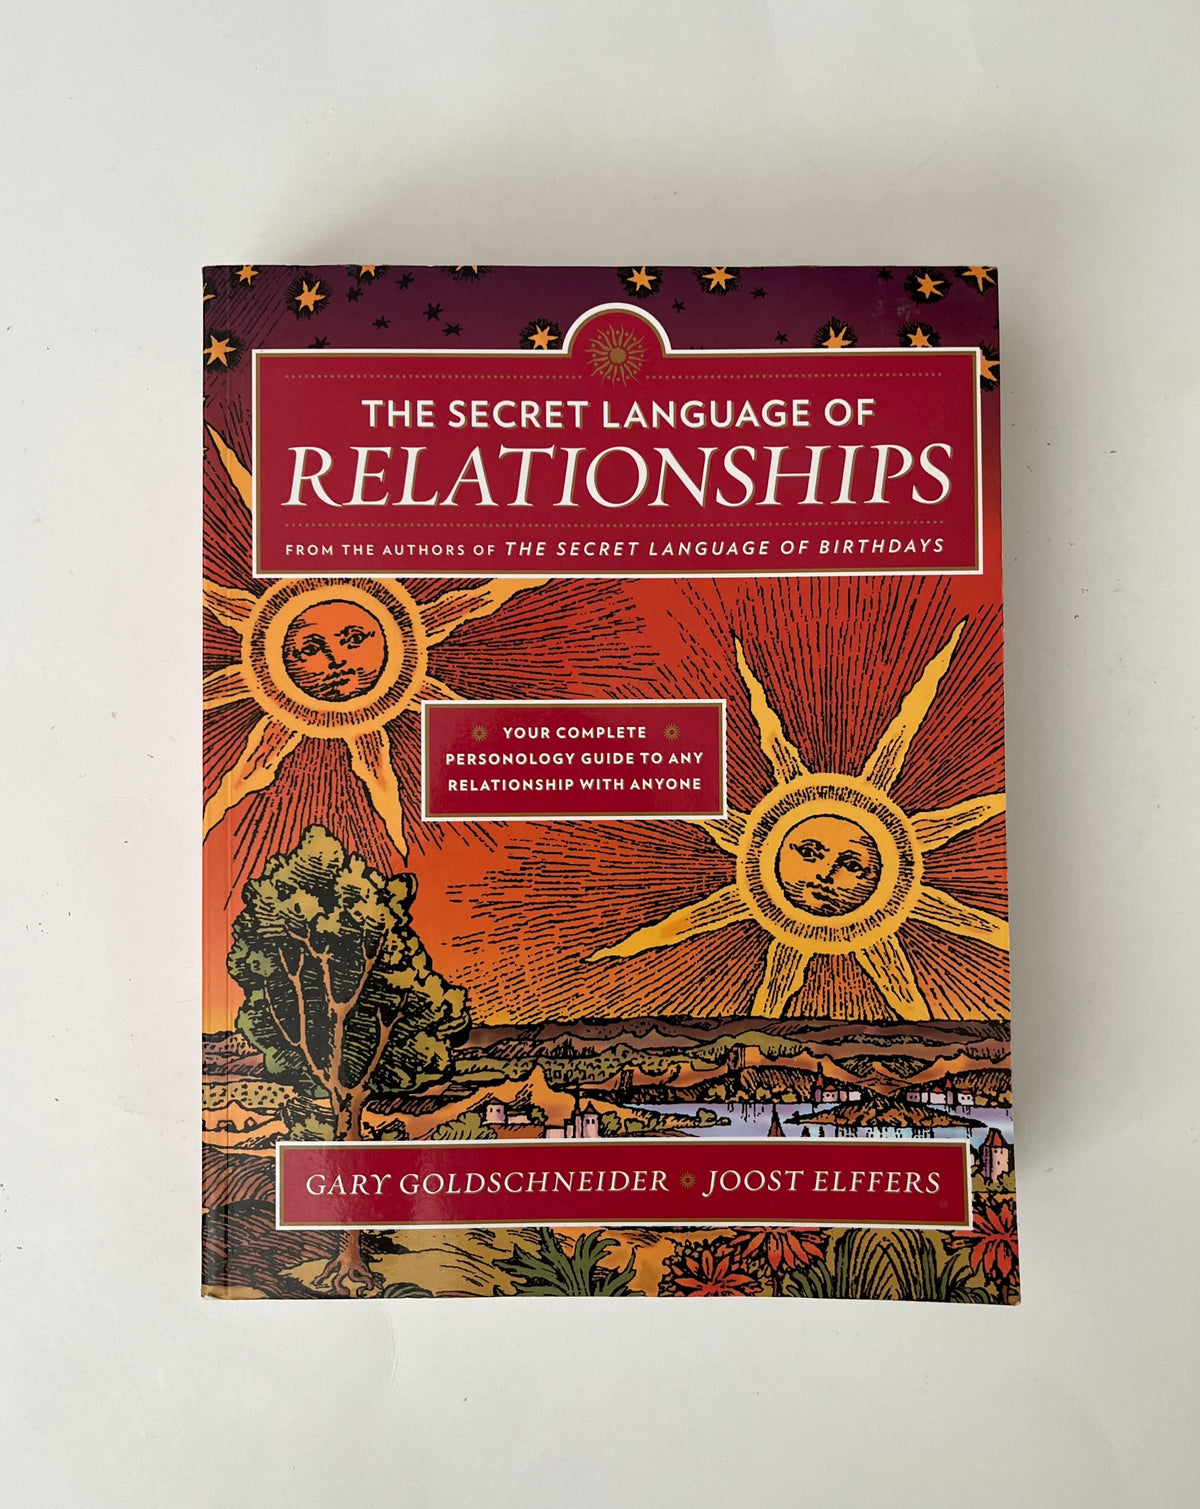 The Secret Language of Relationships: Your Complete Personology Guide to Any Relationship with Anyone by Gary Goldschneider &amp; Joost Elfers